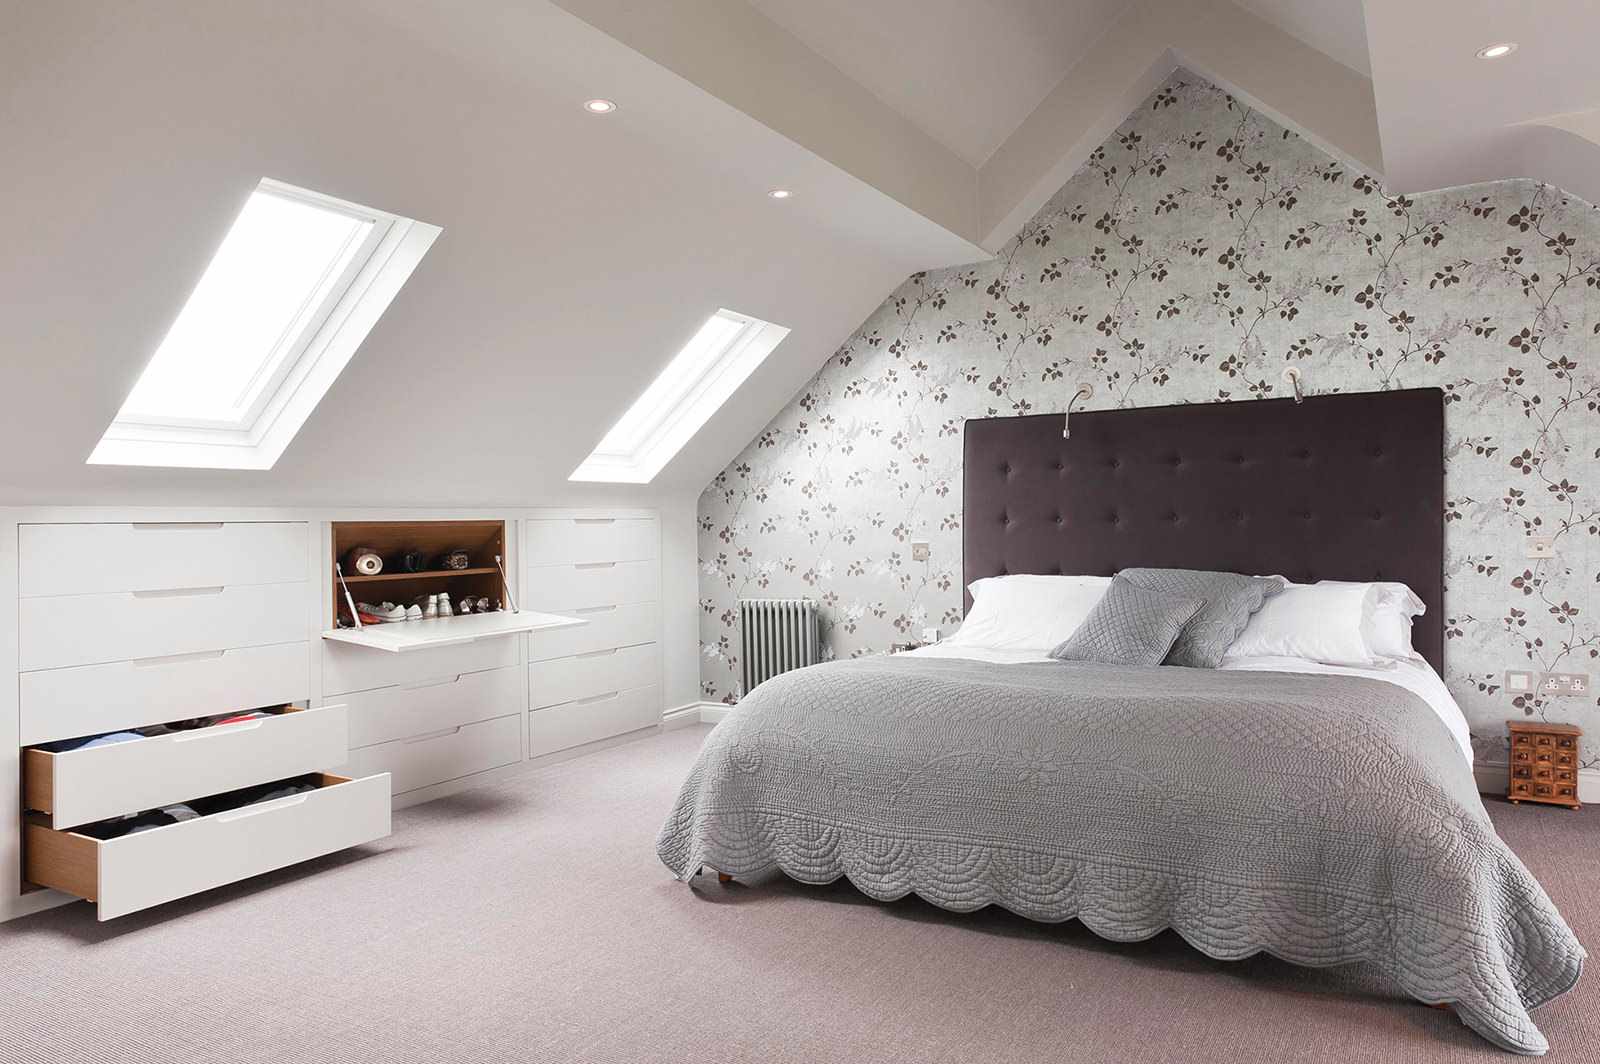 an example of a beautiful decor of a bedroom in the attic